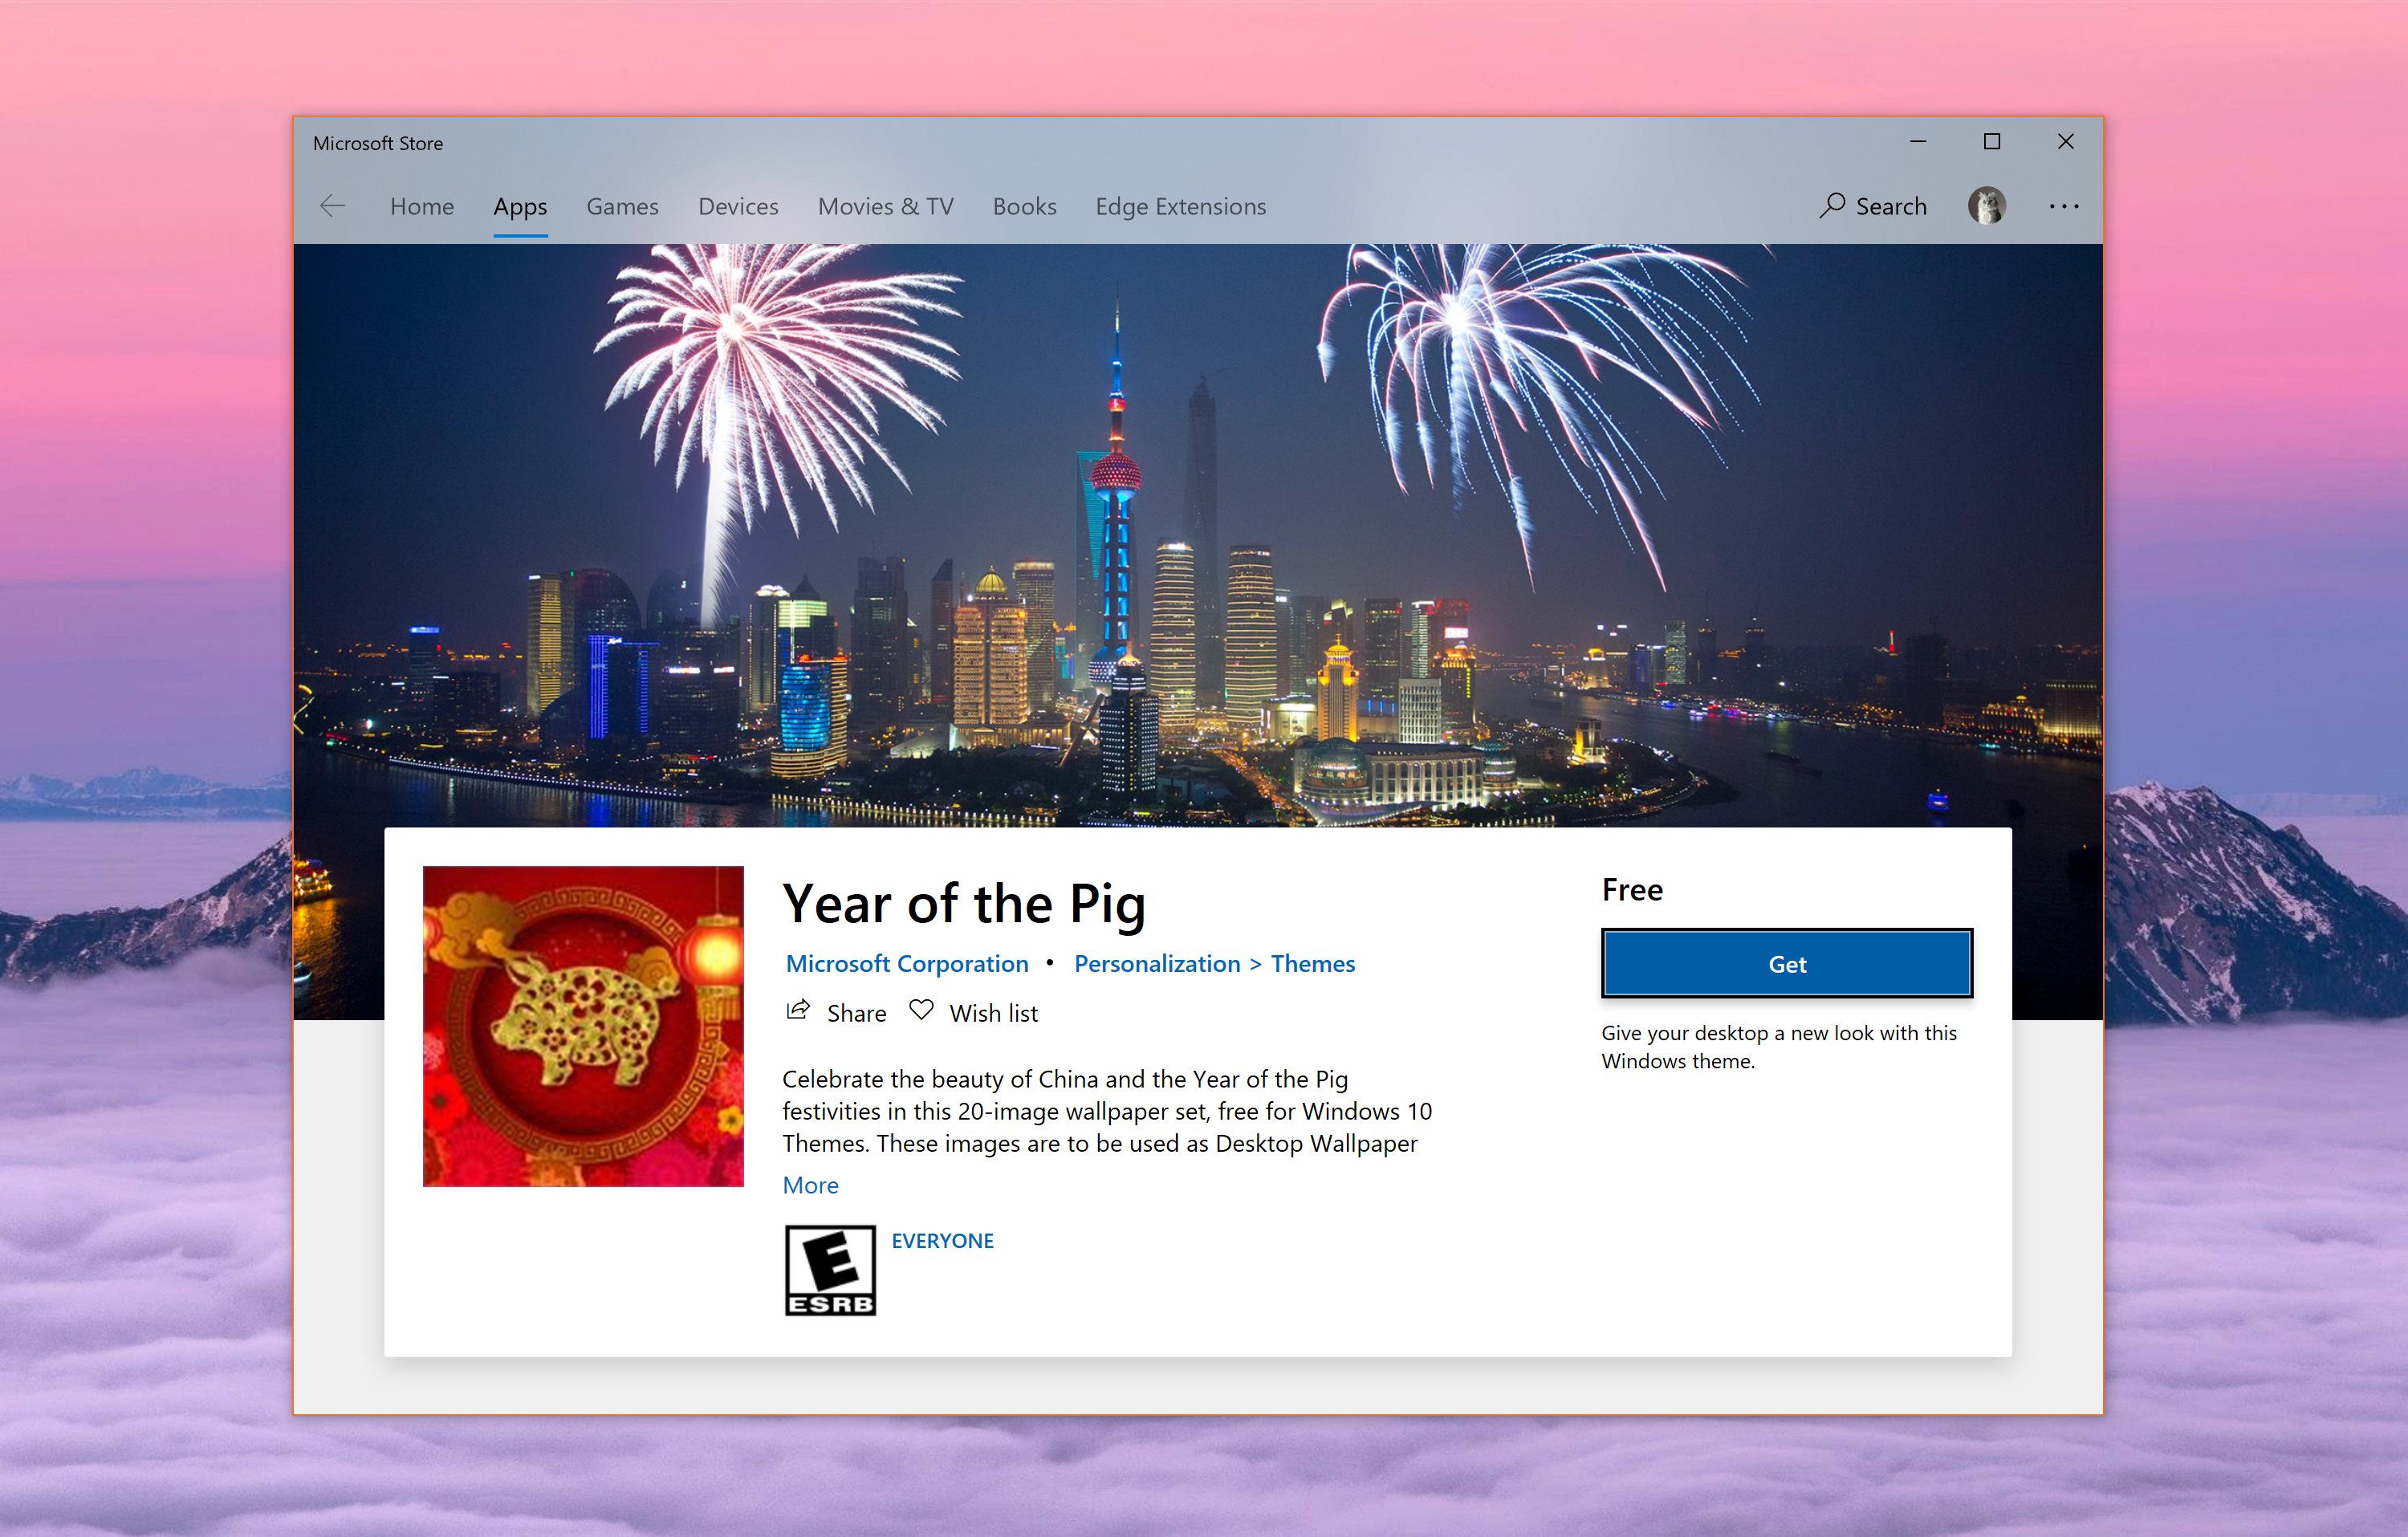 Microsoft Releases A New Windows Theme To Celebrate The